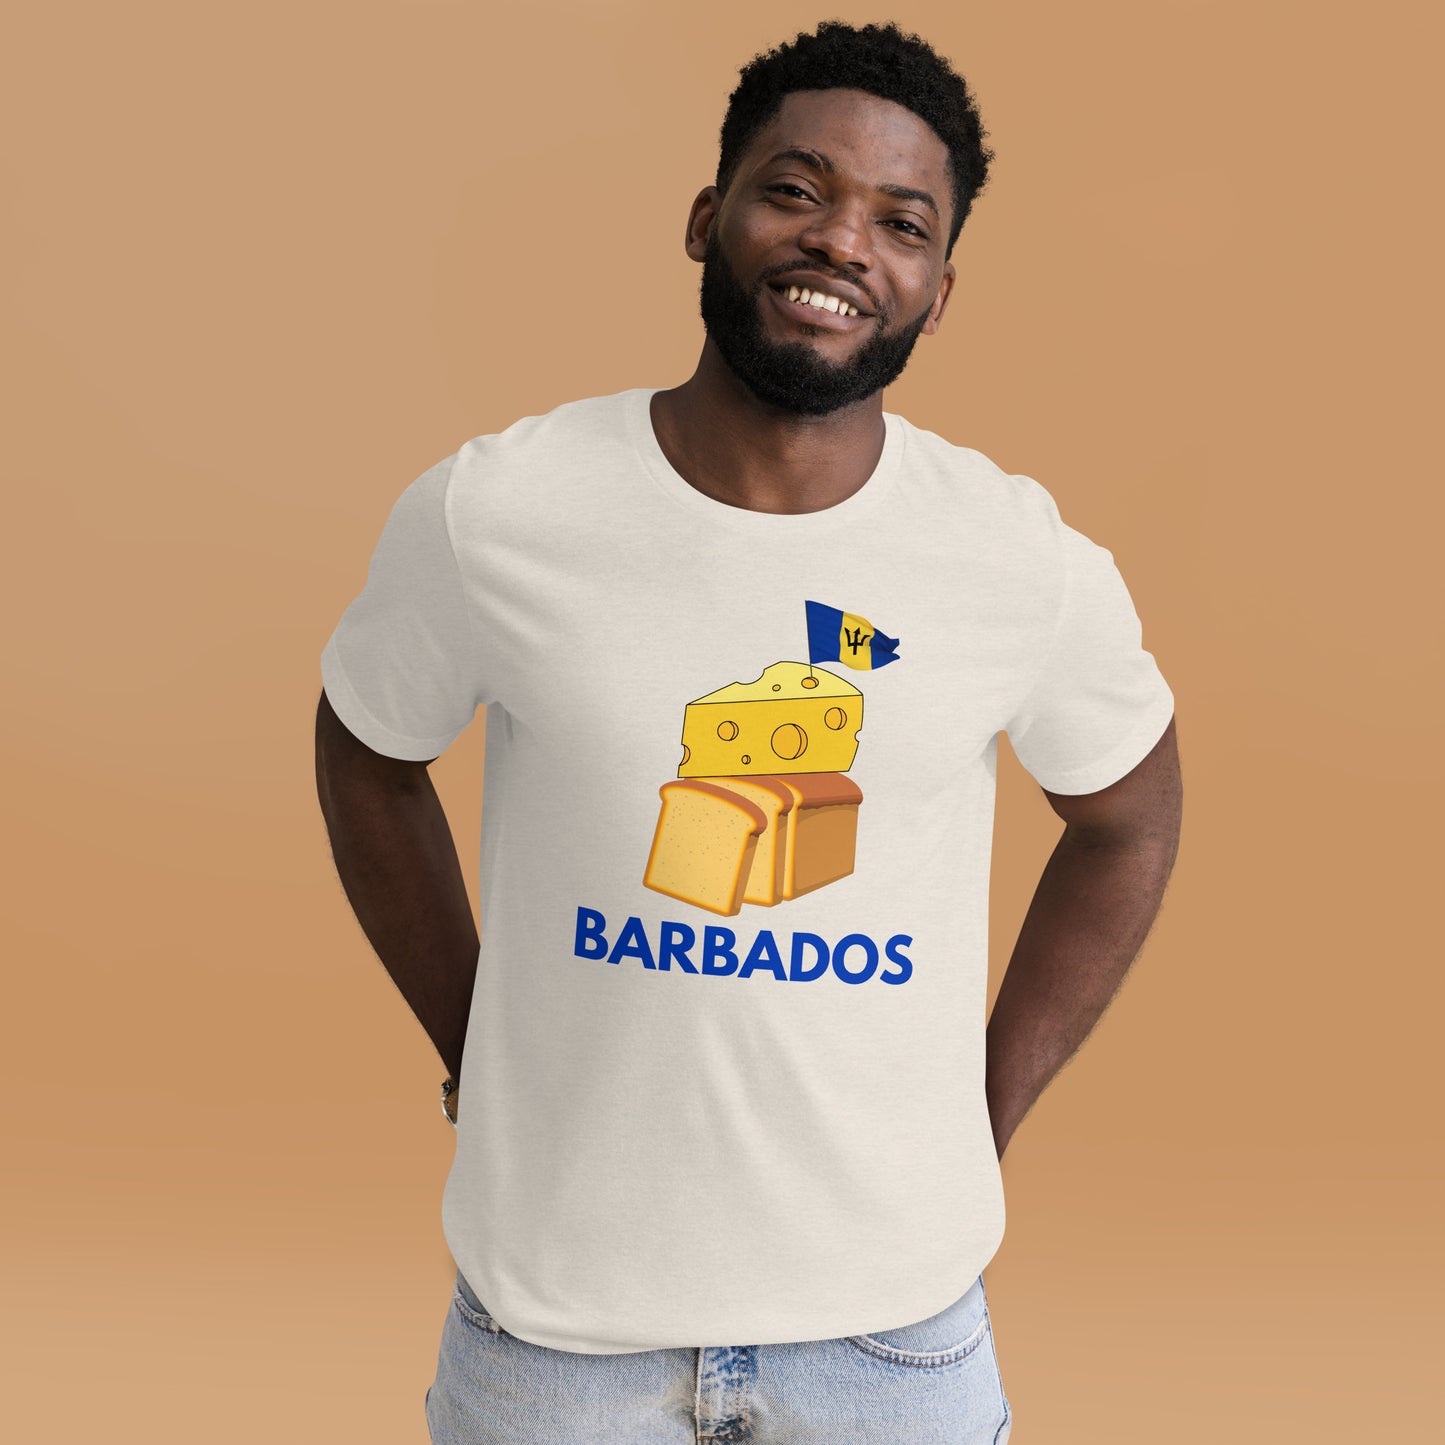 Barbados - "Cheese on Bread" Men's T-shirt